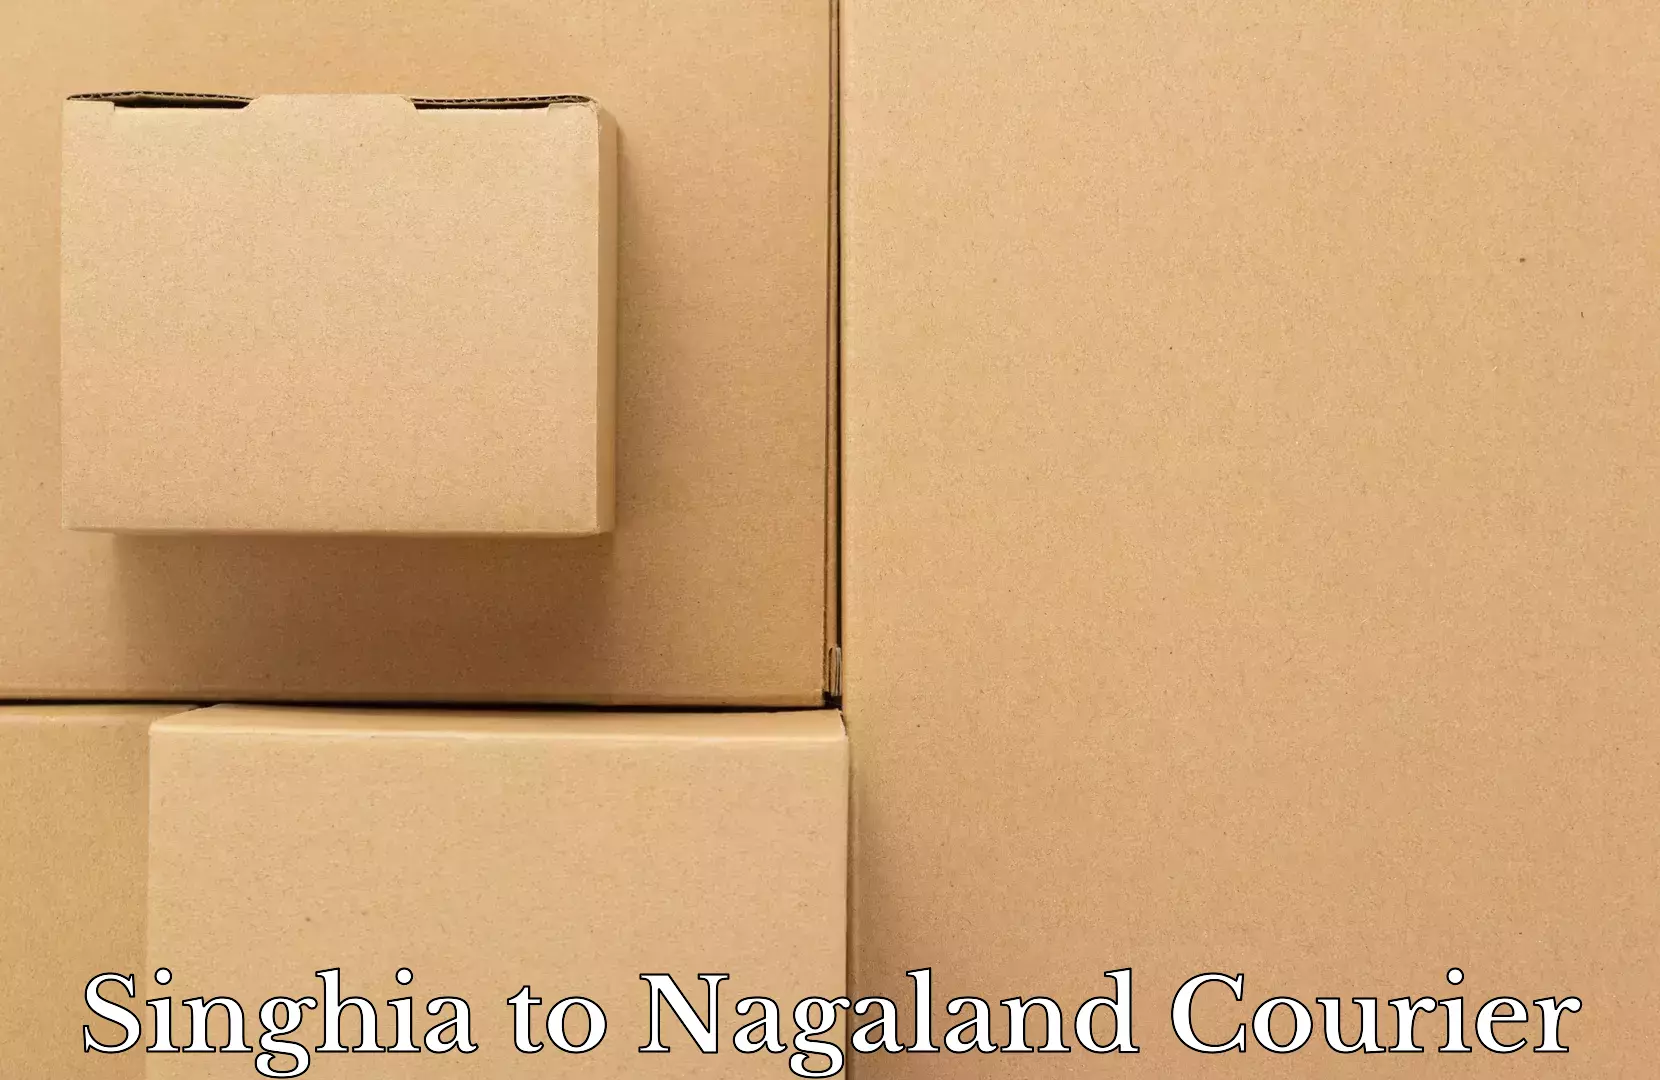 Luggage shipment specialists Singhia to Nagaland